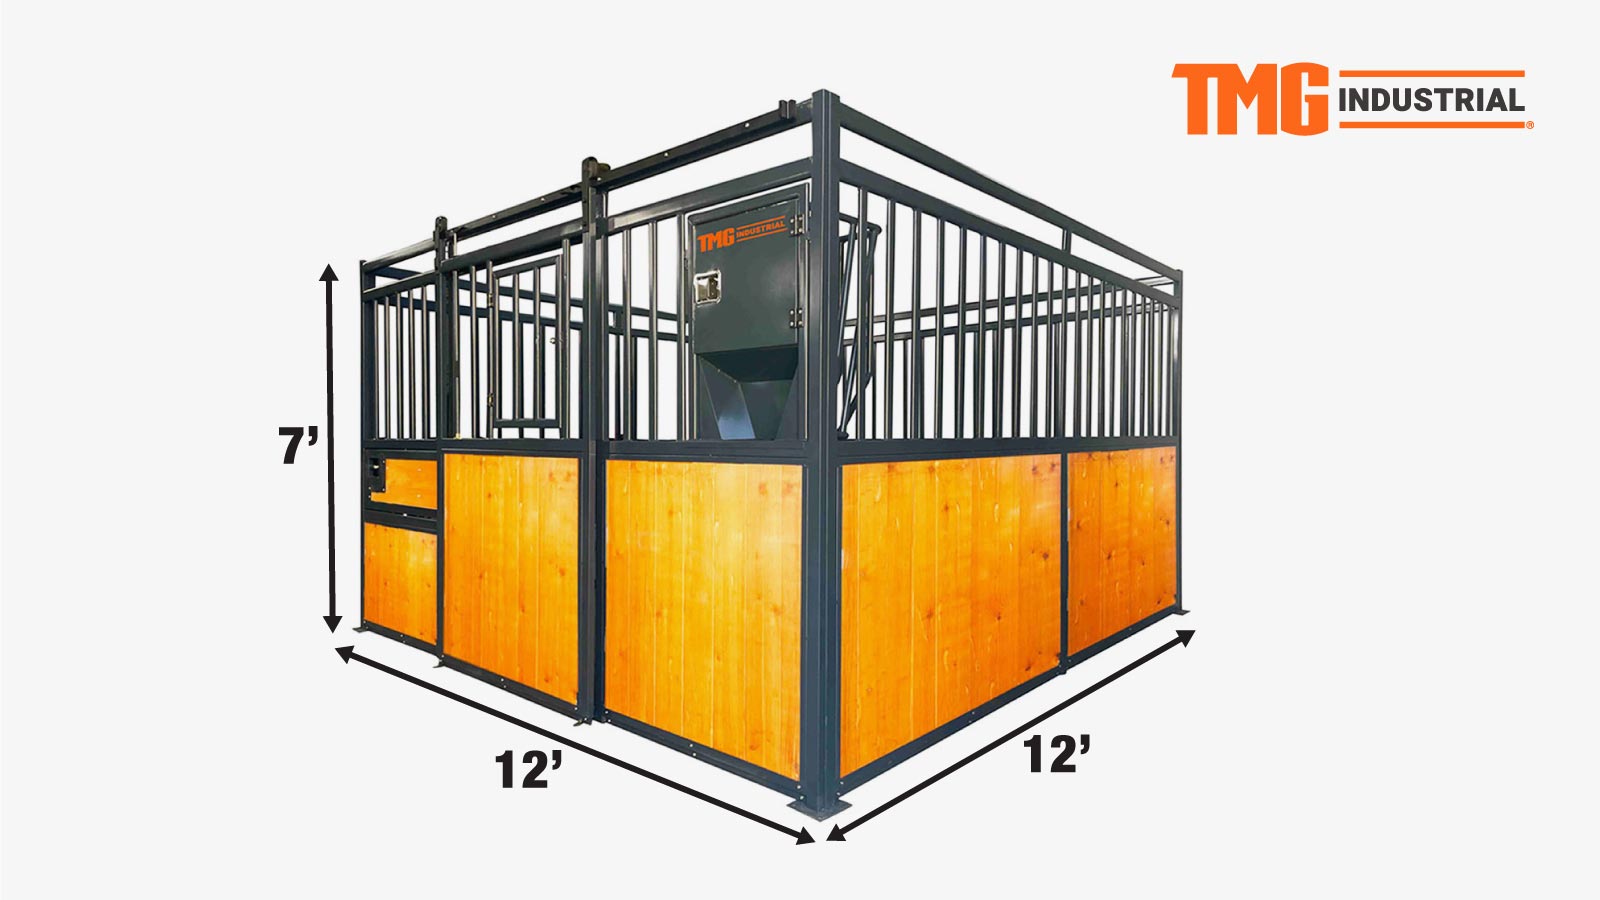 TMG Industrial 12’ Horse Stall Pine Lumber Panel, Vertical Bar Top & Wood-Filled Bottom, Front panel c/w Window/Feeder and Sliding Door, TMG-FHS12A and FHS12B-specifications-image